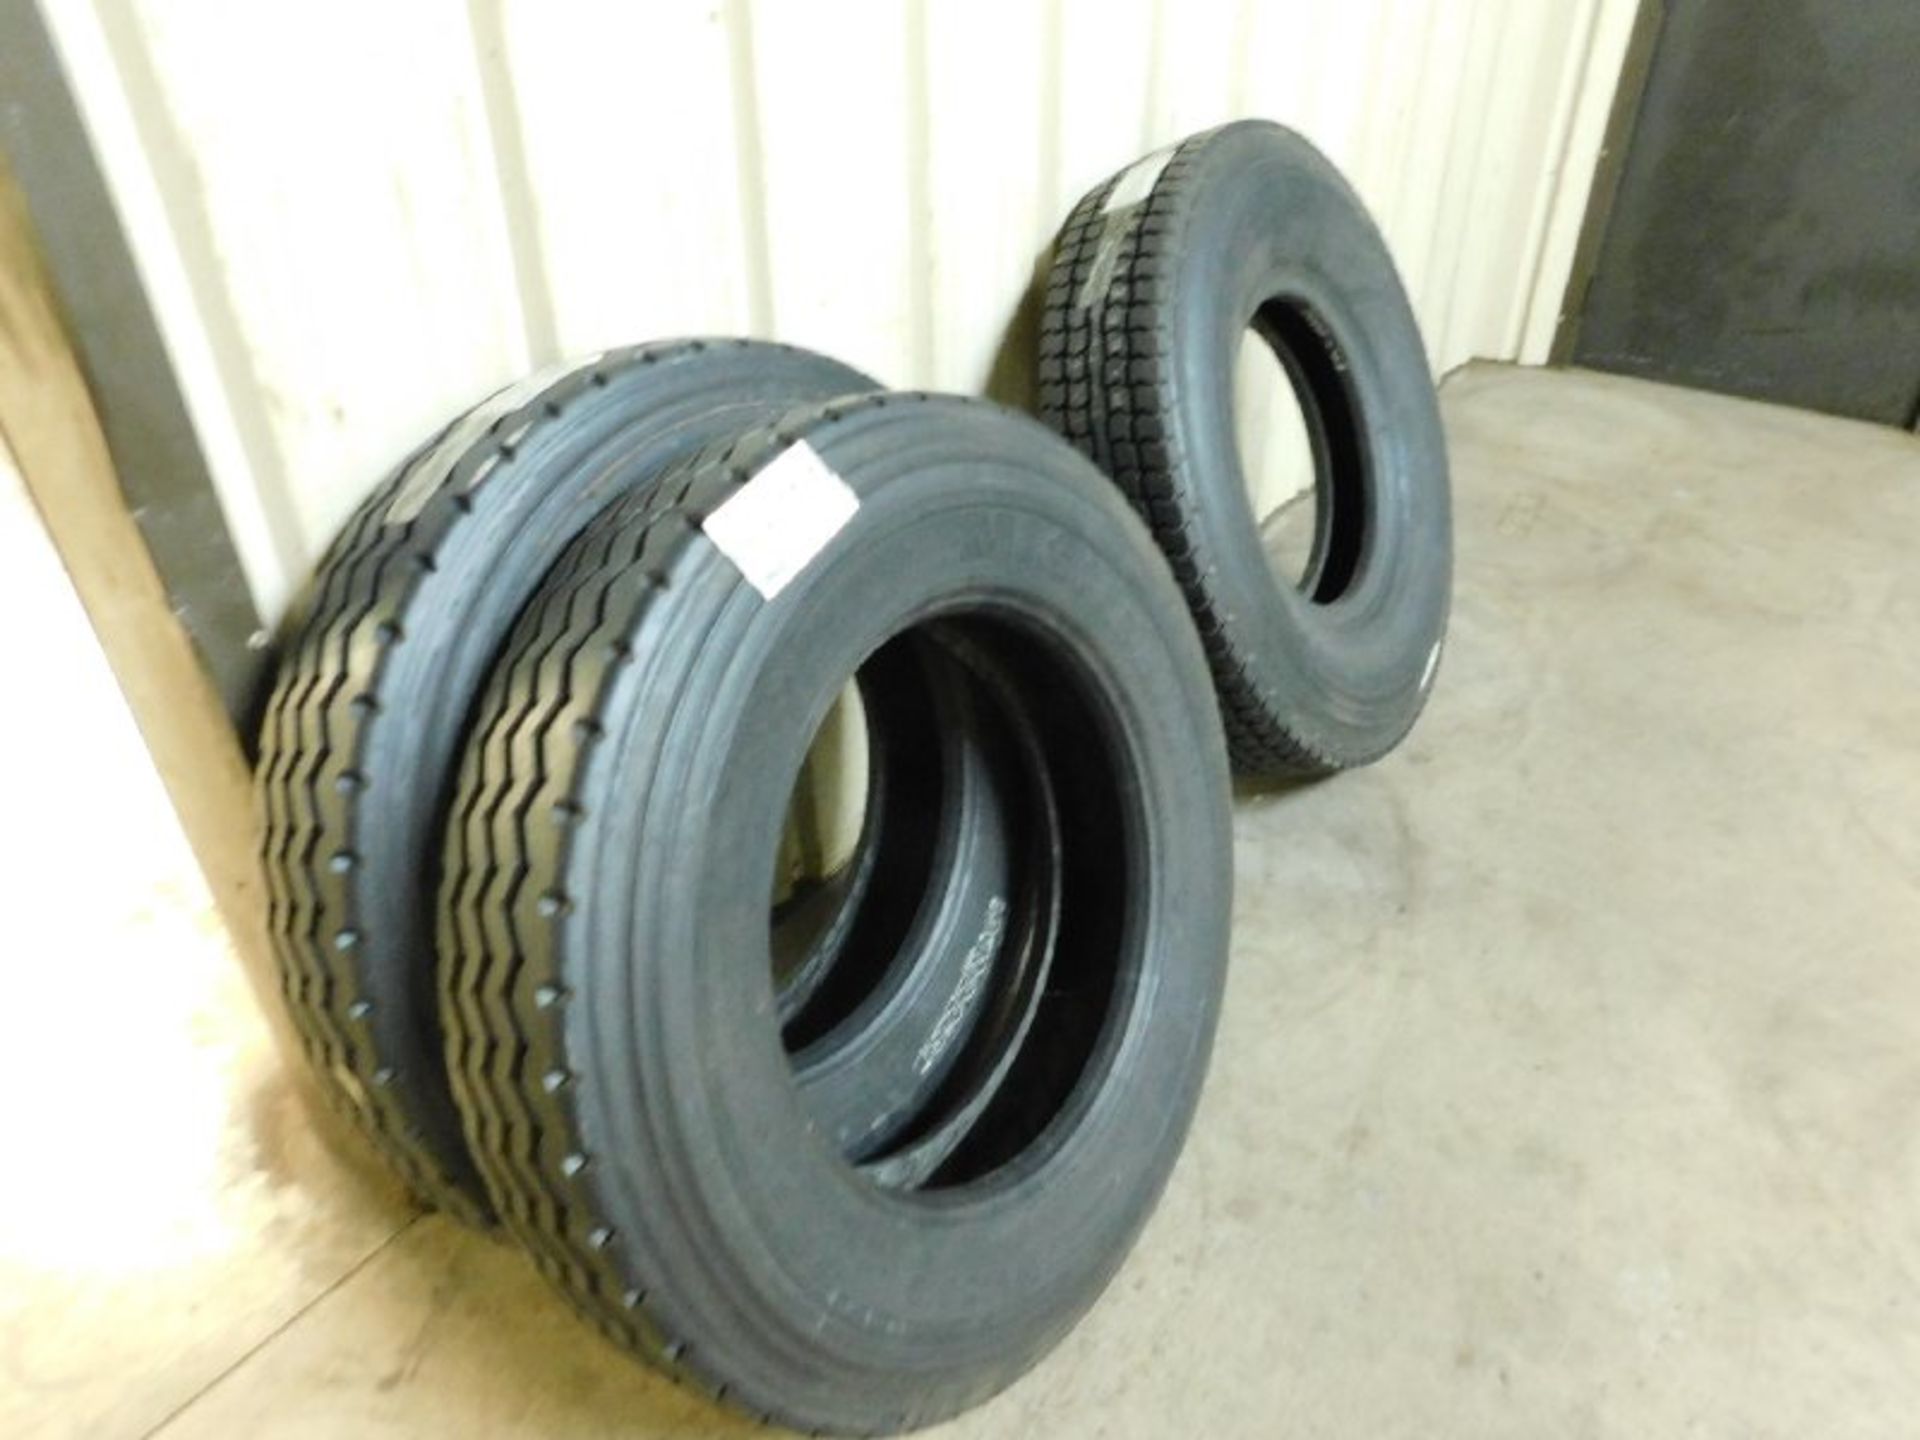 All Truck Tires in Room Used and Retread, Assorted Size and Types, (2) 9R22.5 Retreads, (1) 10.00R20